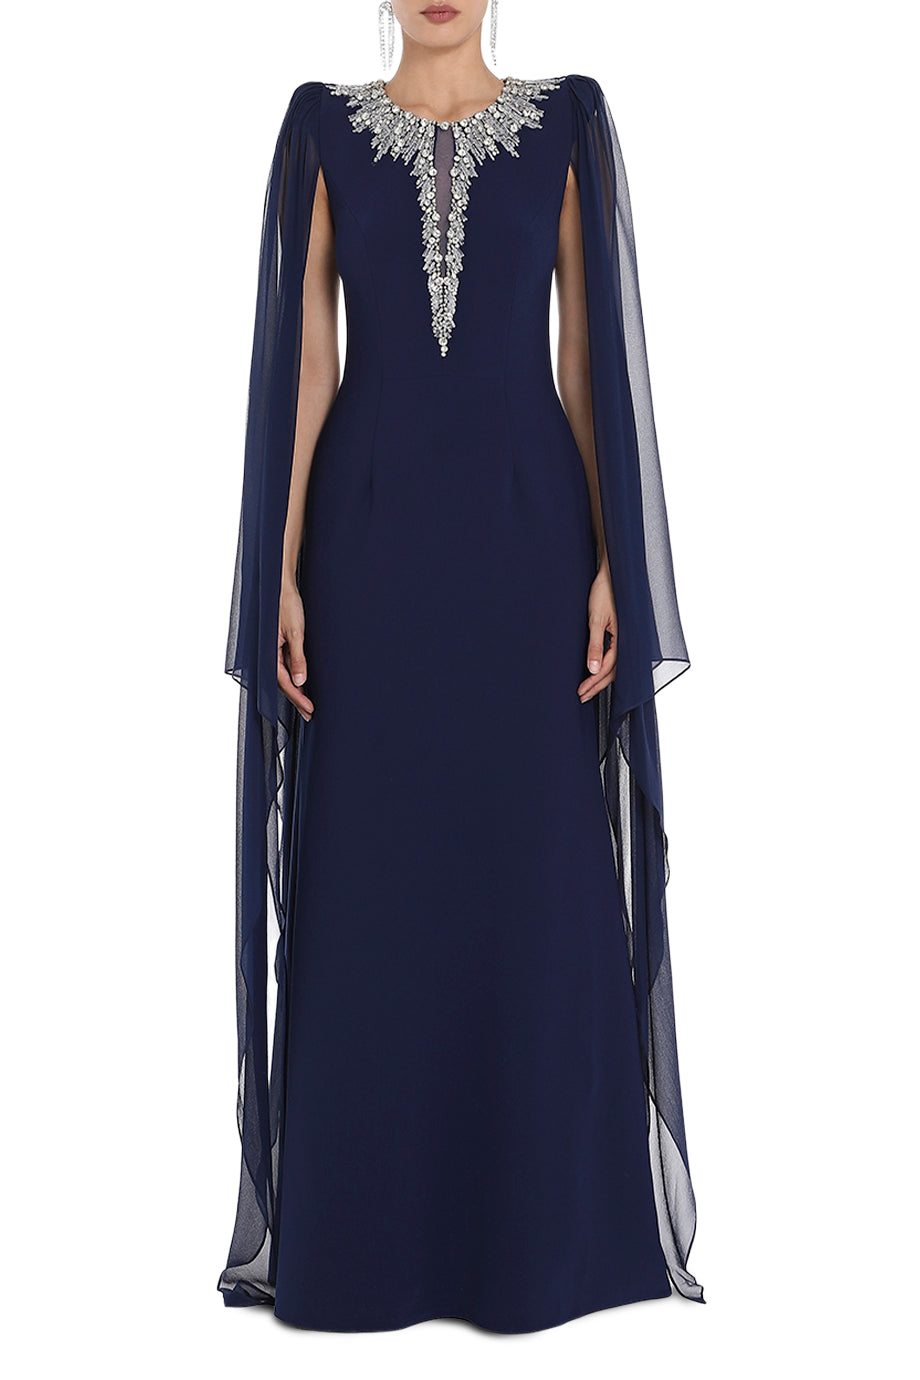 Jenny Packham Flame Lily A-Line Gown in Navy. Shop from Etoile La Boutique